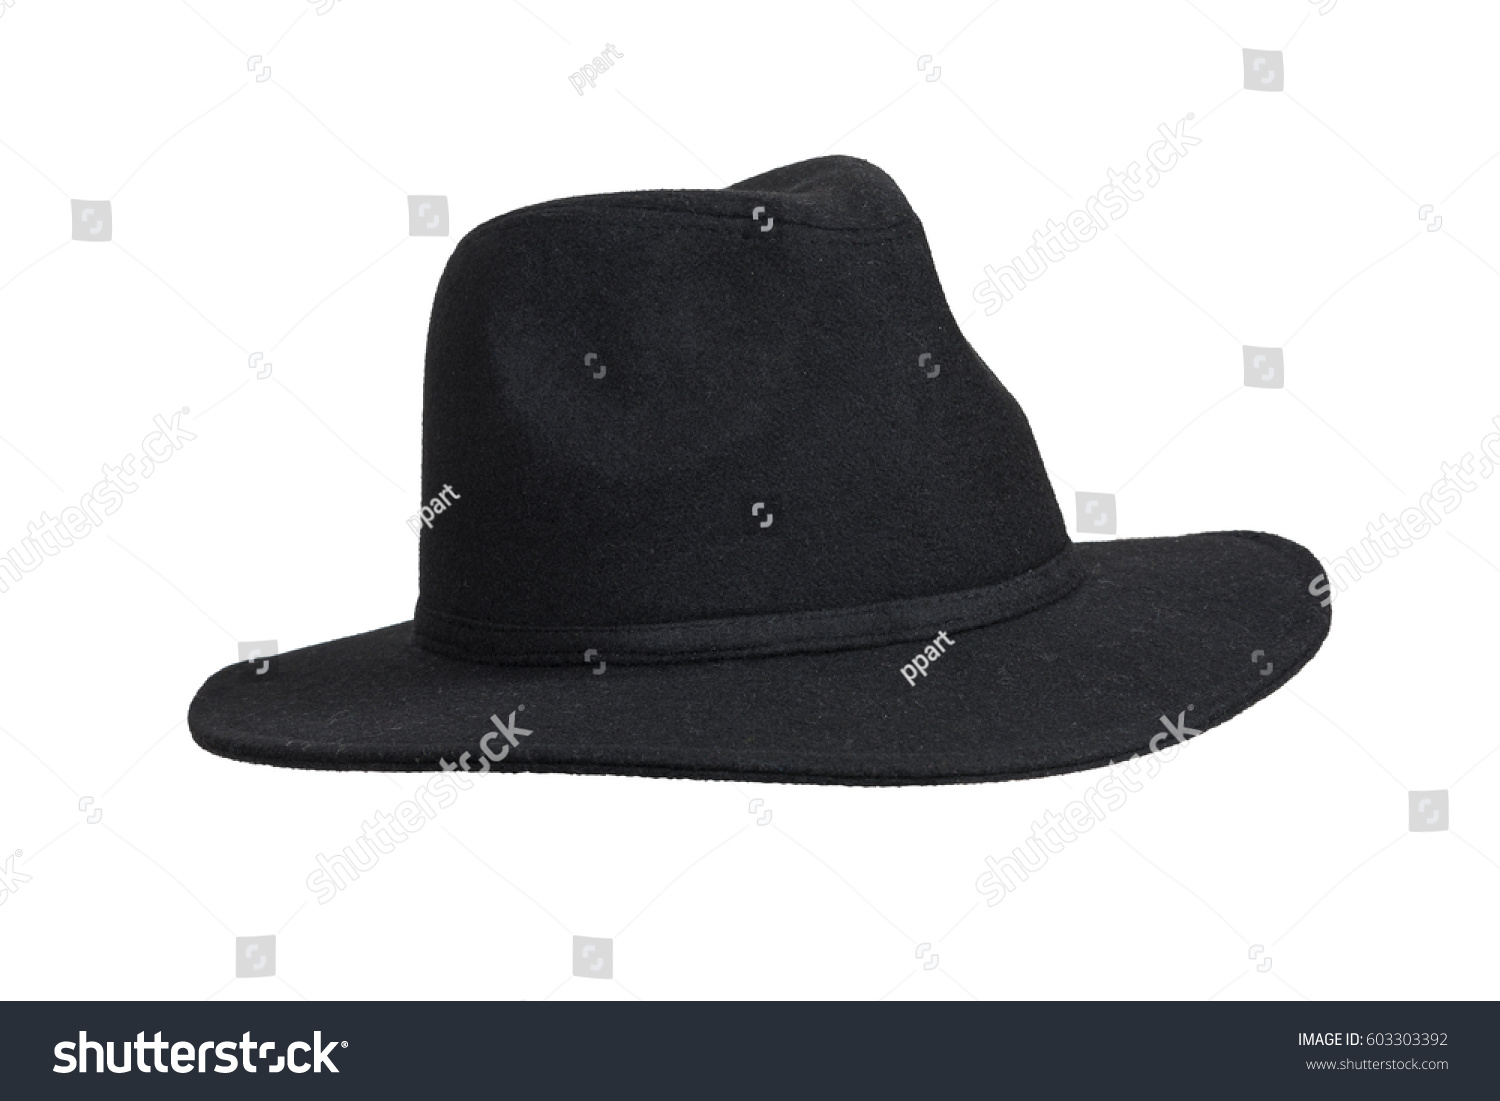 Black woolen hat isolated on white with clipping path. #603303392